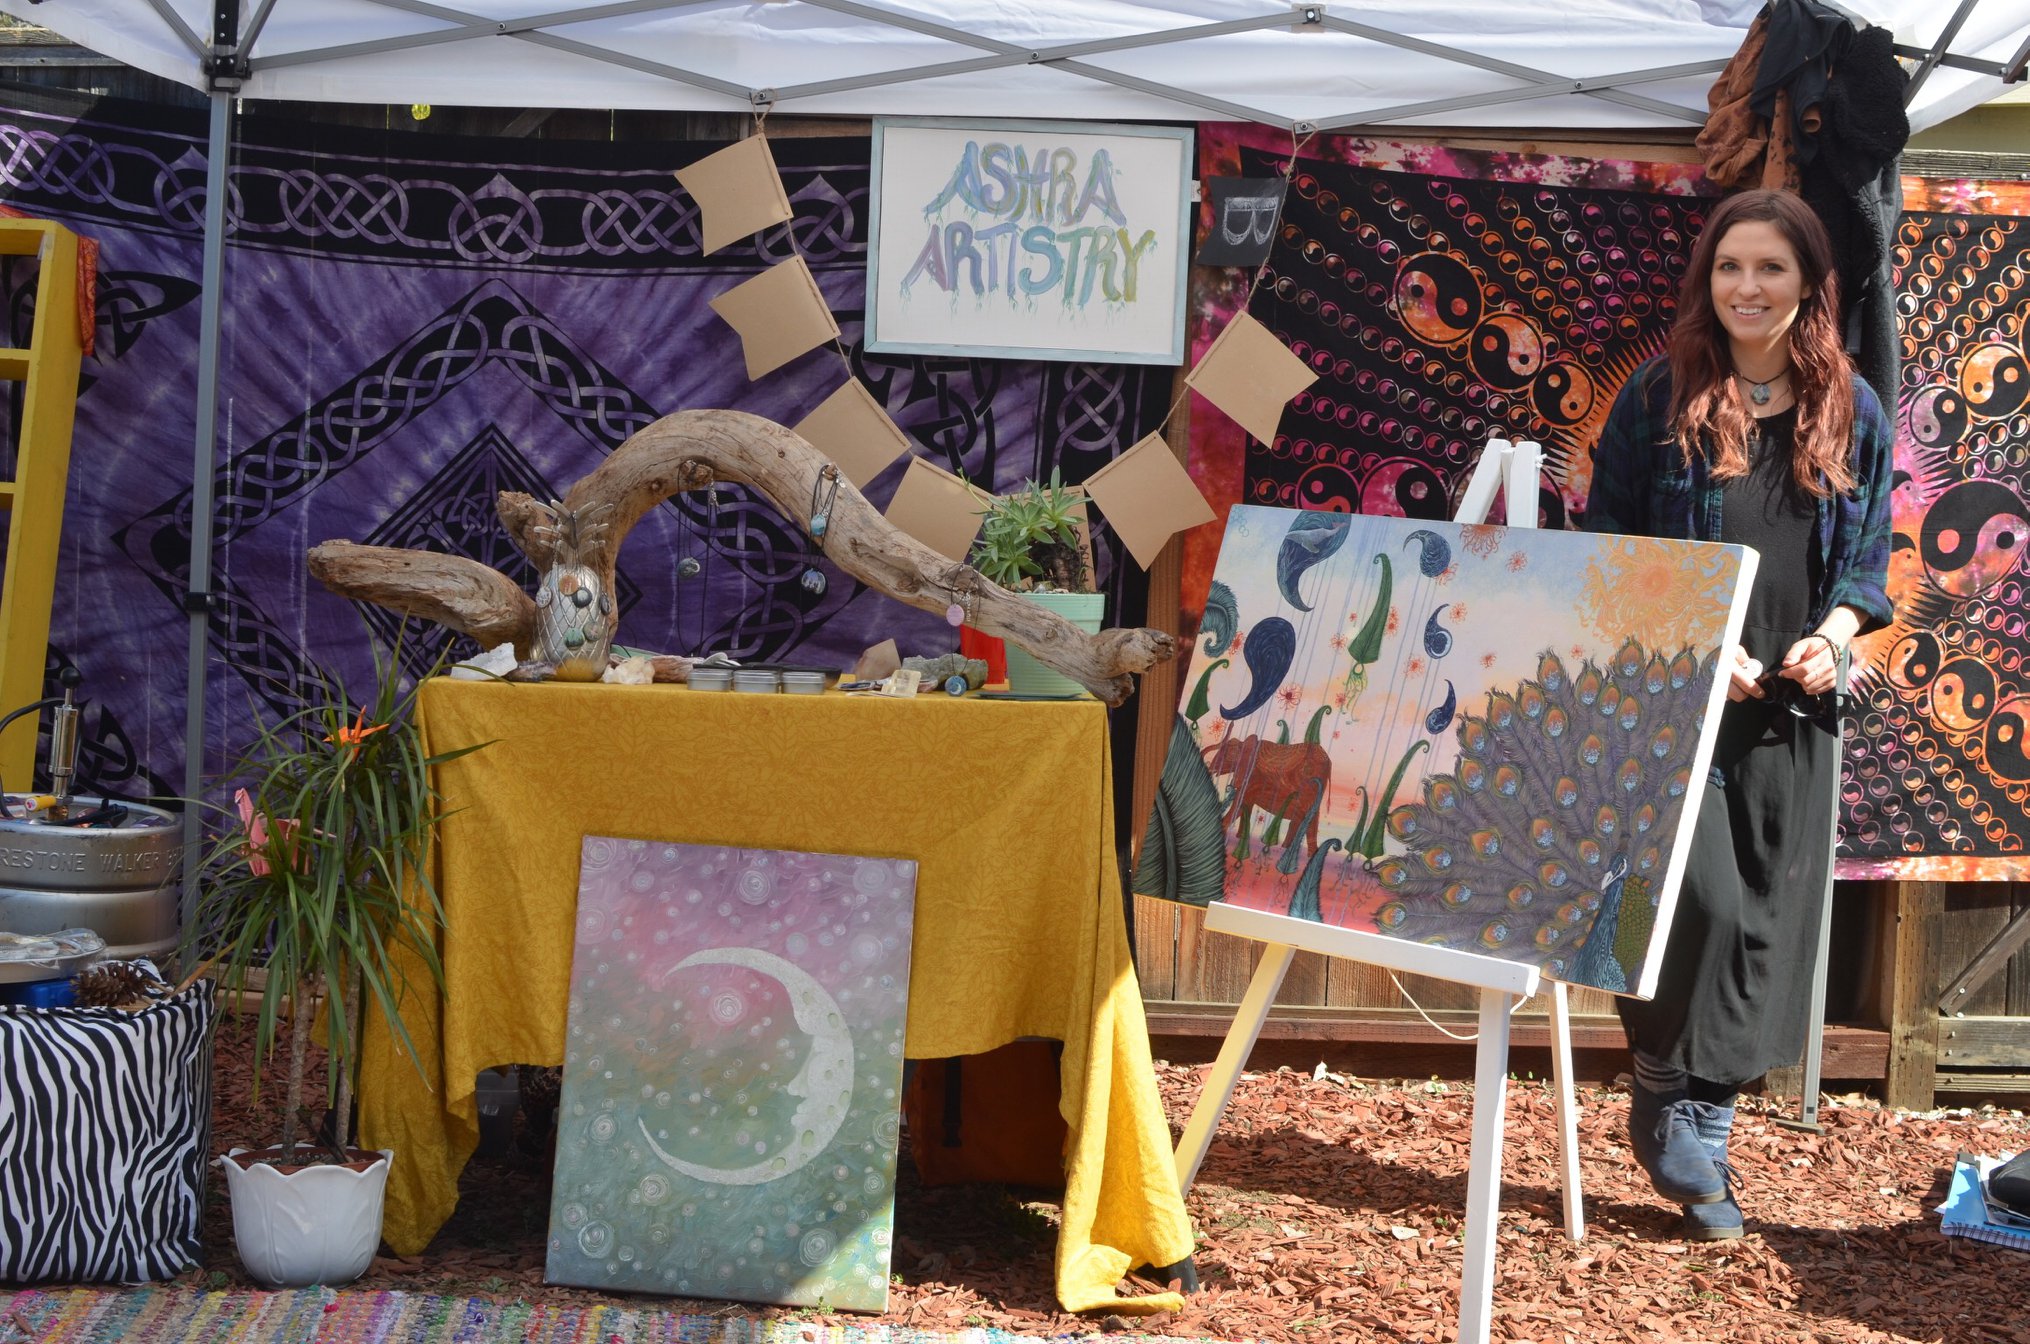 Ashra Artistry is an organization that creates, “miniature art for the whimsical heart”. Pictured above is the Ashra Artistry booth set up at the SubSessions Backyard Pop-up shop on March 18, 2018. 
 Photo Credit: Carter Harrington